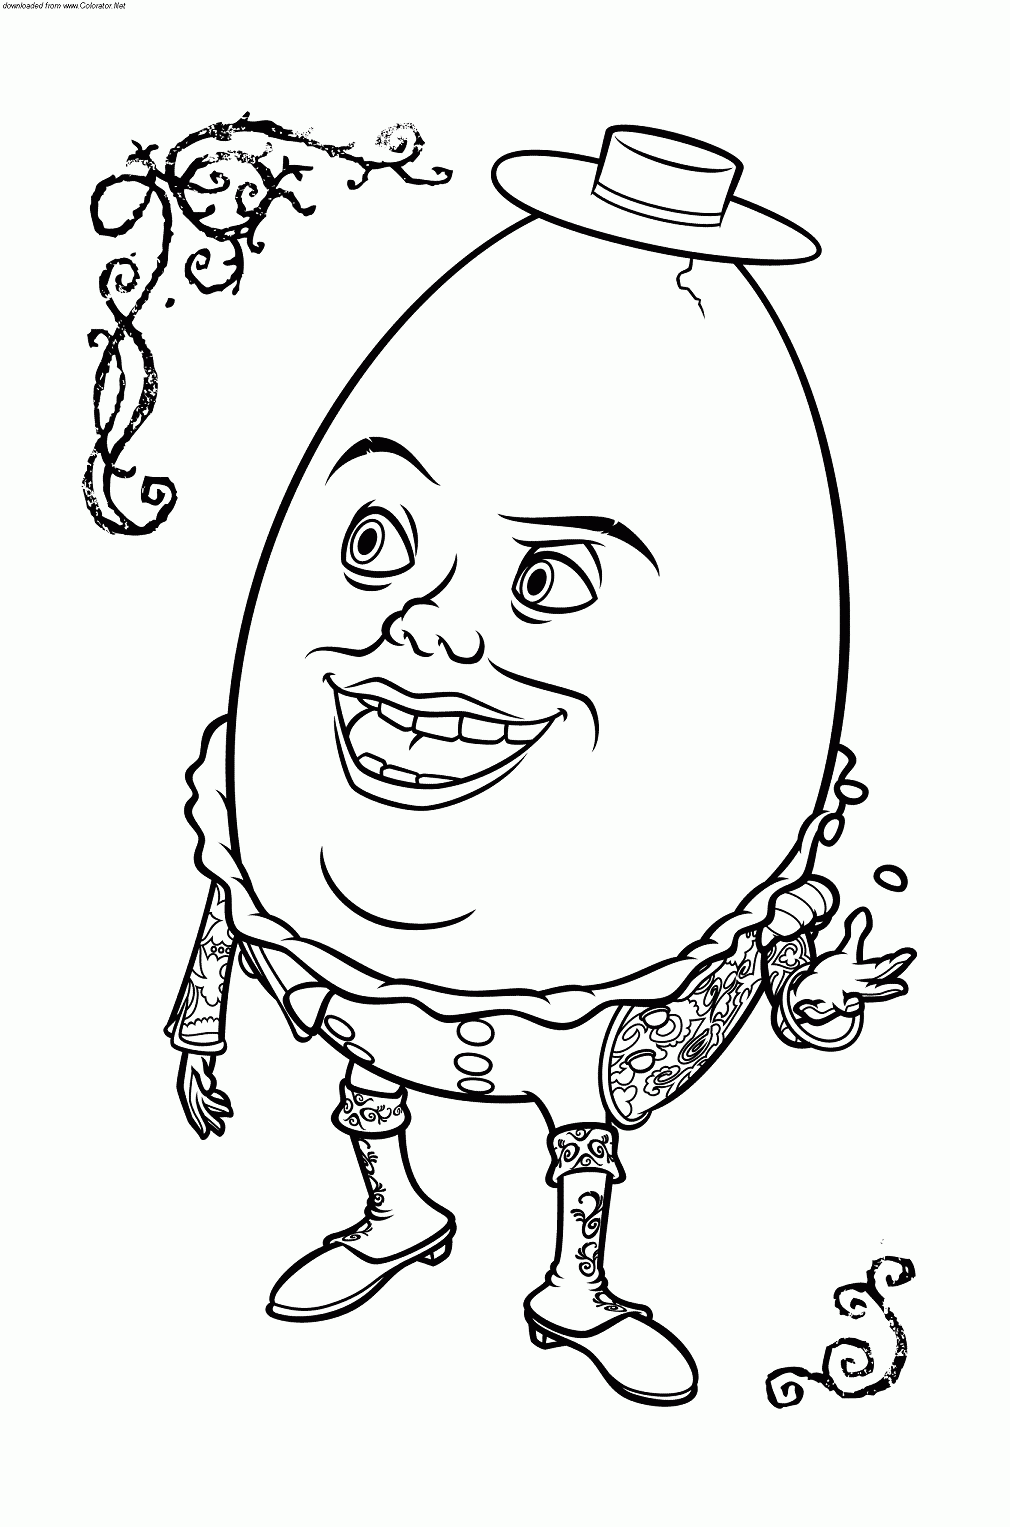 Humpty Dumpty Coloring Pictures How To Draw And Color Humpty Dumpty